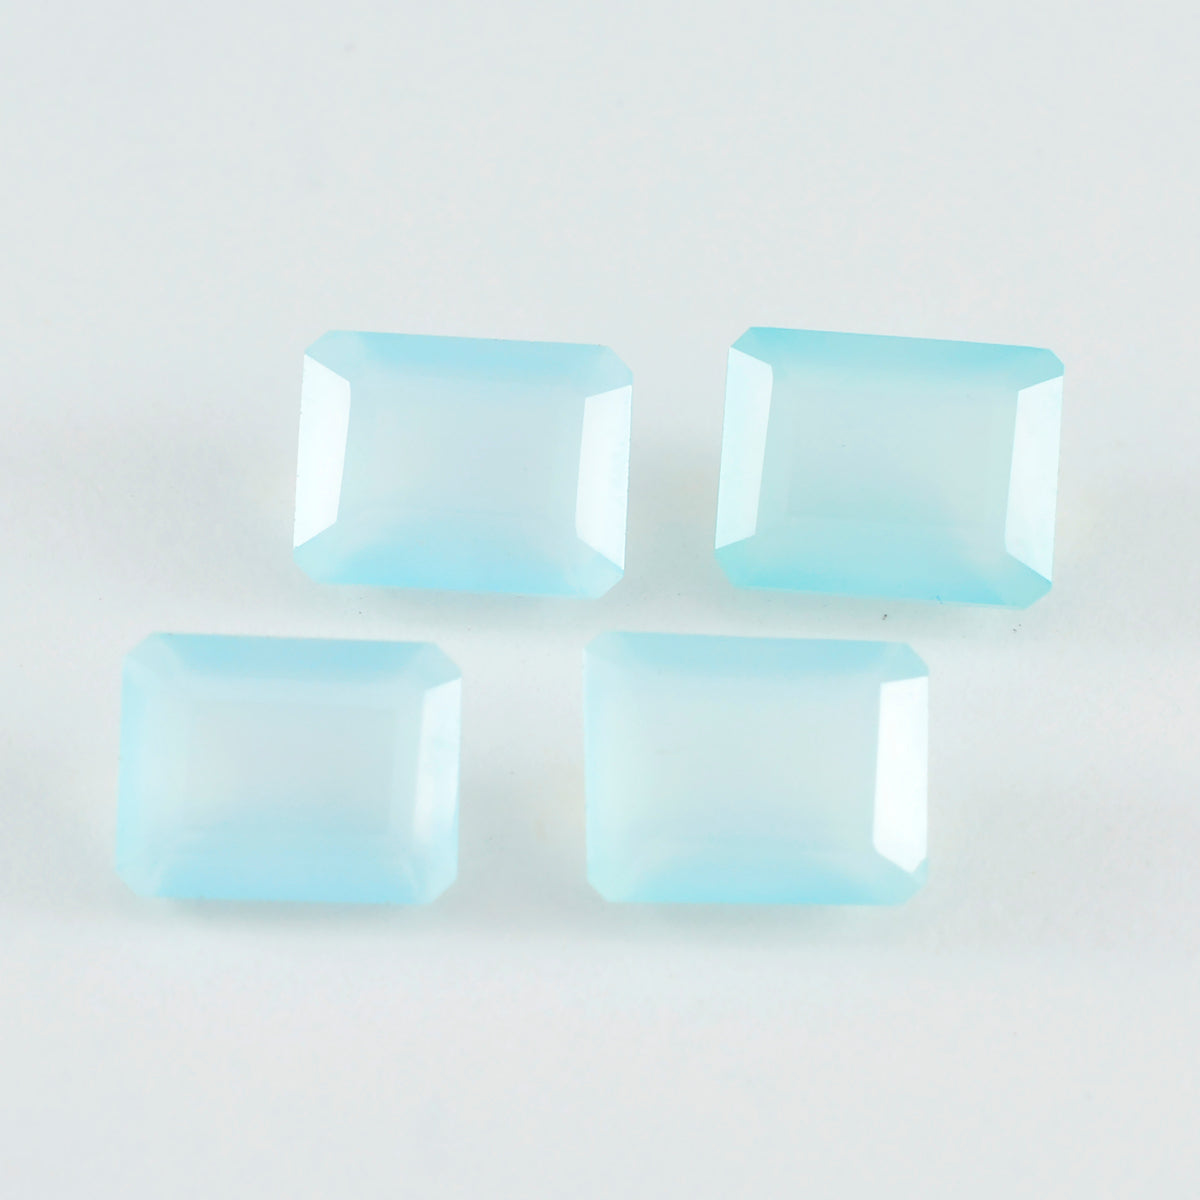 Riyogems 1PC Real Aqua Chalcedony Faceted 10x12 mm Octagon Shape nice-looking Quality Loose Gems